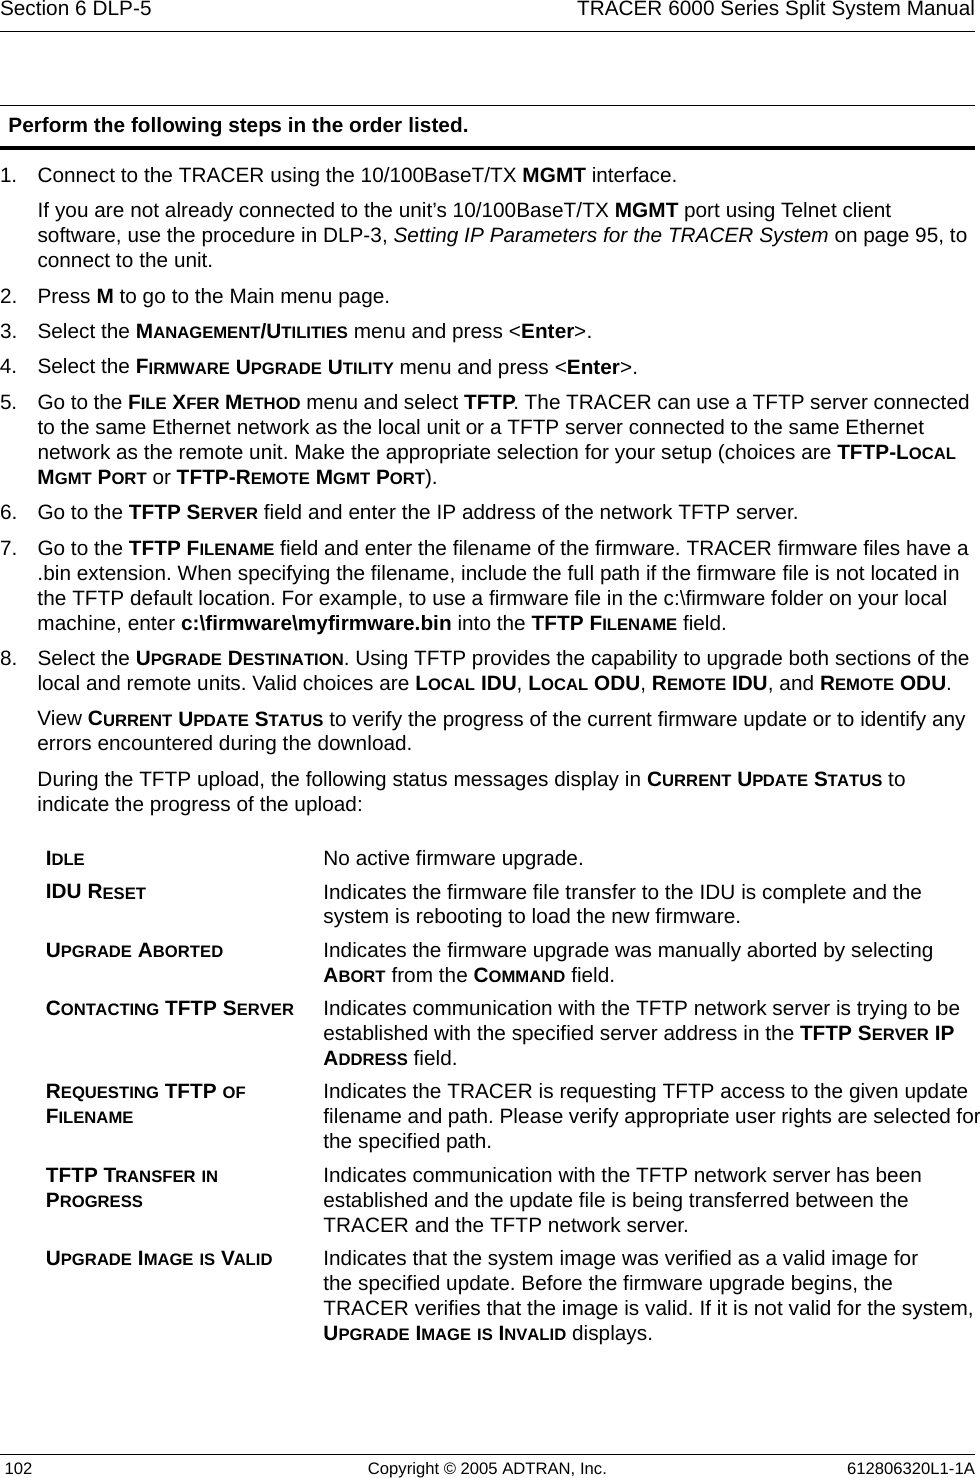 Section 6 DLP-5  TRACER 6000 Series Split System Manual 102 Copyright © 2005 ADTRAN, Inc. 612806320L1-1A1. Connect to the TRACER using the 10/100BaseT/TX MGMT interface.If you are not already connected to the unit’s 10/100BaseT/TX MGMT port using Telnet client software, use the procedure in DLP-3, Setting IP Parameters for the TRACER System on page 95, to connect to the unit. 2. Press M to go to the Main menu page. 3. Select the MANAGEMENT/UTILITIES menu and press &lt;Enter&gt;.4. Select the FIRMWARE UPGRADE UTILITY menu and press &lt;Enter&gt;.5. Go to the FILE XFER METHOD menu and select TFTP. The TRACER can use a TFTP server connected to the same Ethernet network as the local unit or a TFTP server connected to the same Ethernet network as the remote unit. Make the appropriate selection for your setup (choices are TFTP-LOCAL MGMT PORT or TFTP-REMOTE MGMT PORT).6. Go to the TFTP SERVER field and enter the IP address of the network TFTP server.7. Go to the TFTP FILENAME field and enter the filename of the firmware. TRACER firmware files have a .bin extension. When specifying the filename, include the full path if the firmware file is not located in the TFTP default location. For example, to use a firmware file in the c:\firmware folder on your local machine, enter c:\firmware\myfirmware.bin into the TFTP FILENAME field.8. Select the UPGRADE DESTINATION. Using TFTP provides the capability to upgrade both sections of the local and remote units. Valid choices are LOCAL IDU, LOCAL ODU, REMOTE IDU, and REMOTE ODU.View CURRENT UPDATE STATUS to verify the progress of the current firmware update or to identify any errors encountered during the download.During the TFTP upload, the following status messages display in CURRENT UPDATE STATUS to indicate the progress of the upload:Perform the following steps in the order listed.IDLE No active firmware upgrade.IDU RESET Indicates the firmware file transfer to the IDU is complete and the system is rebooting to load the new firmware.UPGRADE ABORTED Indicates the firmware upgrade was manually aborted by selecting ABORT from the COMMAND field.CONTACTING TFTP SERVER Indicates communication with the TFTP network server is trying to be established with the specified server address in the TFTP SERVER IP ADDRESS field.REQUESTING TFTP OF FILENAMEIndicates the TRACER is requesting TFTP access to the given update filename and path. Please verify appropriate user rights are selected for the specified path.TFTP TRANSFER IN PROGRESSIndicates communication with the TFTP network server has been established and the update file is being transferred between the TRACER and the TFTP network server.UPGRADE IMAGE IS VALID Indicates that the system image was verified as a valid image for the specified update. Before the firmware upgrade begins, the TRACER verifies that the image is valid. If it is not valid for the system, UPGRADE IMAGE IS INVALID displays.